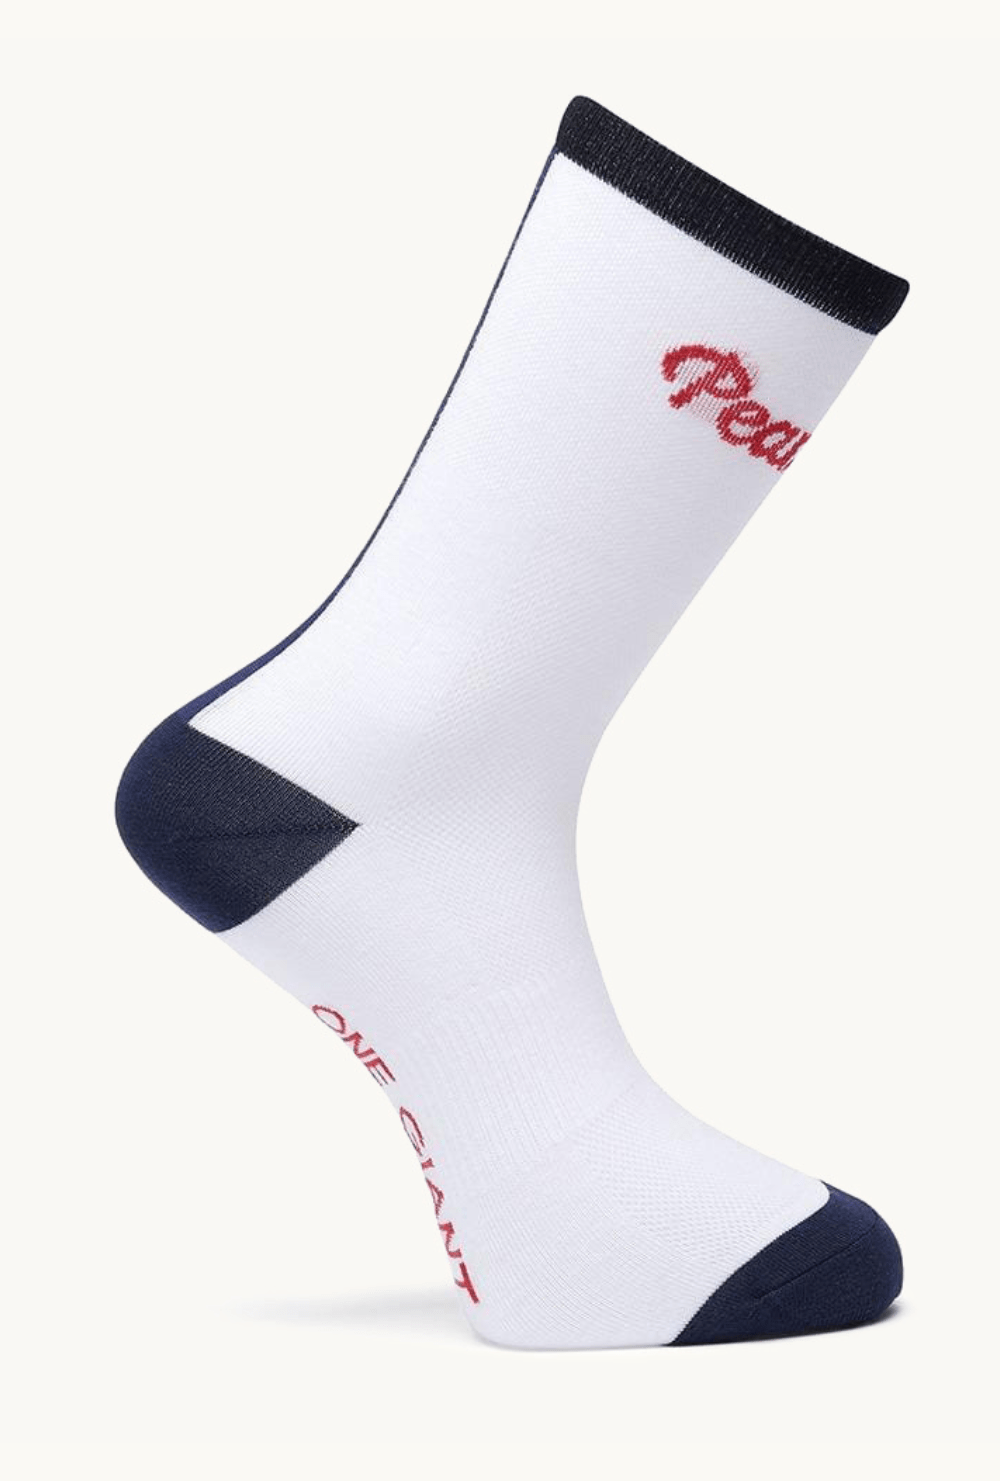 Pearson 1860  One Small Step One Giant Leap - Socks  S/m